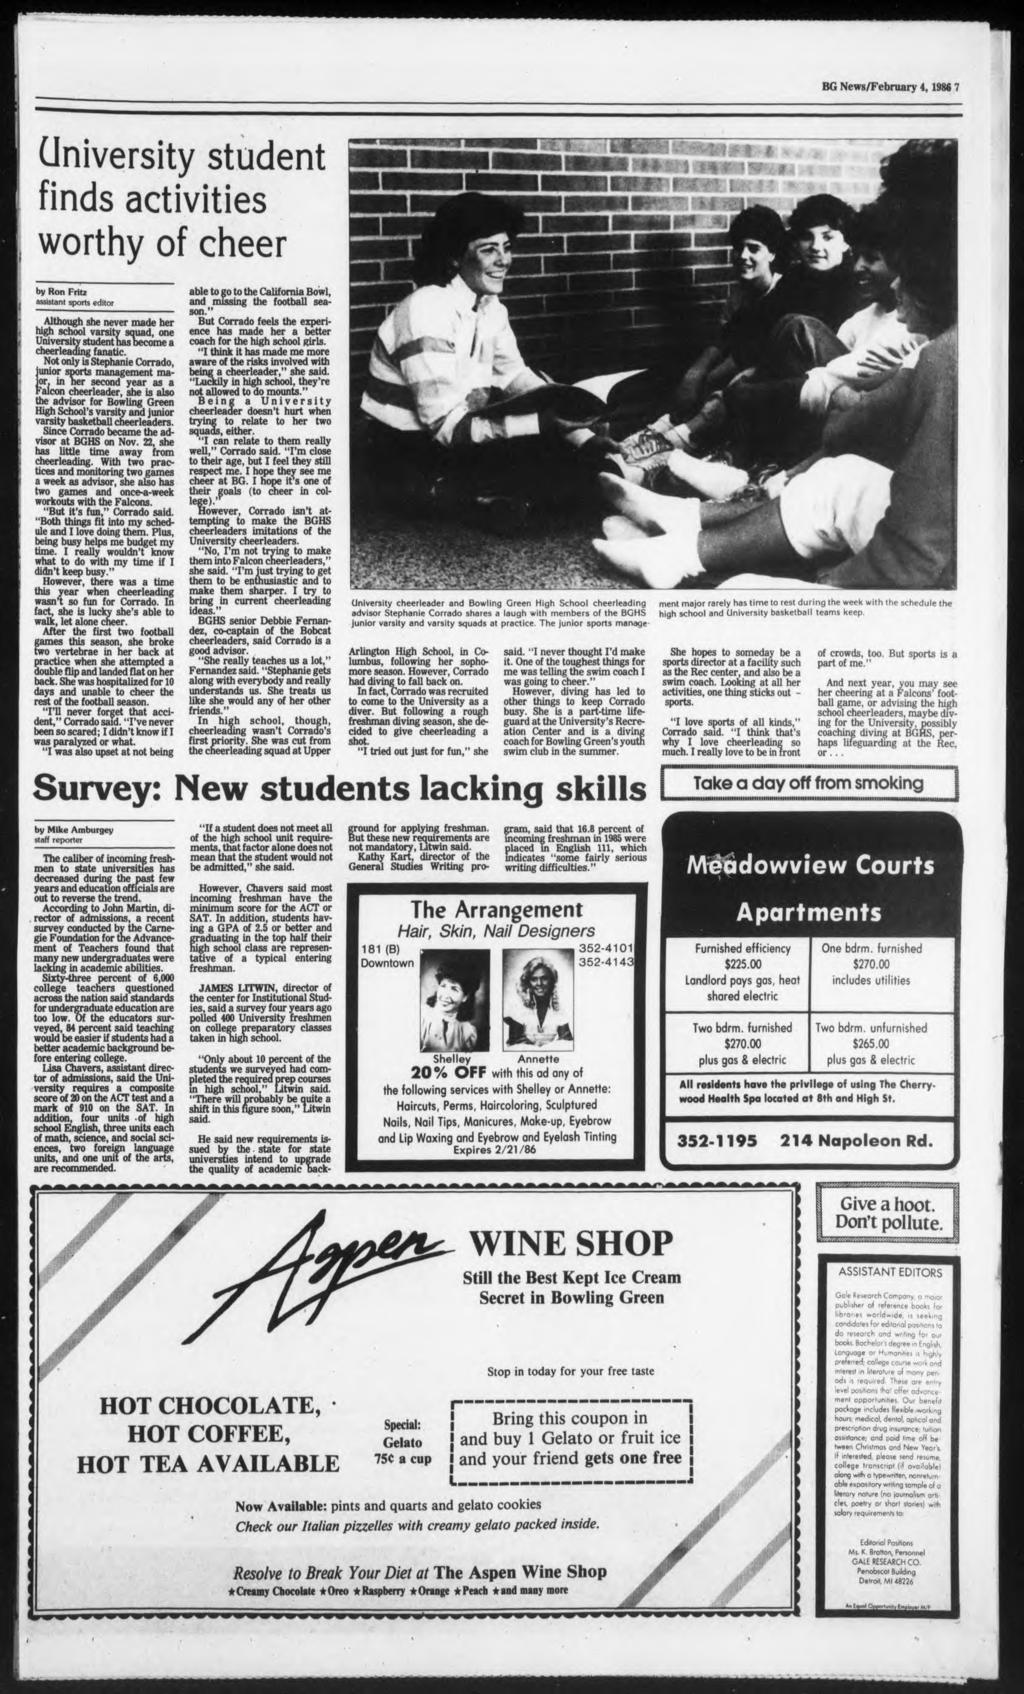 BG News/February 4, 1986 7 Unversty student fnds actvtes worthy of cheer by Ron Frt assstant sports edtor Although she never made her hgh school varsty squad, one Unversty student has become a